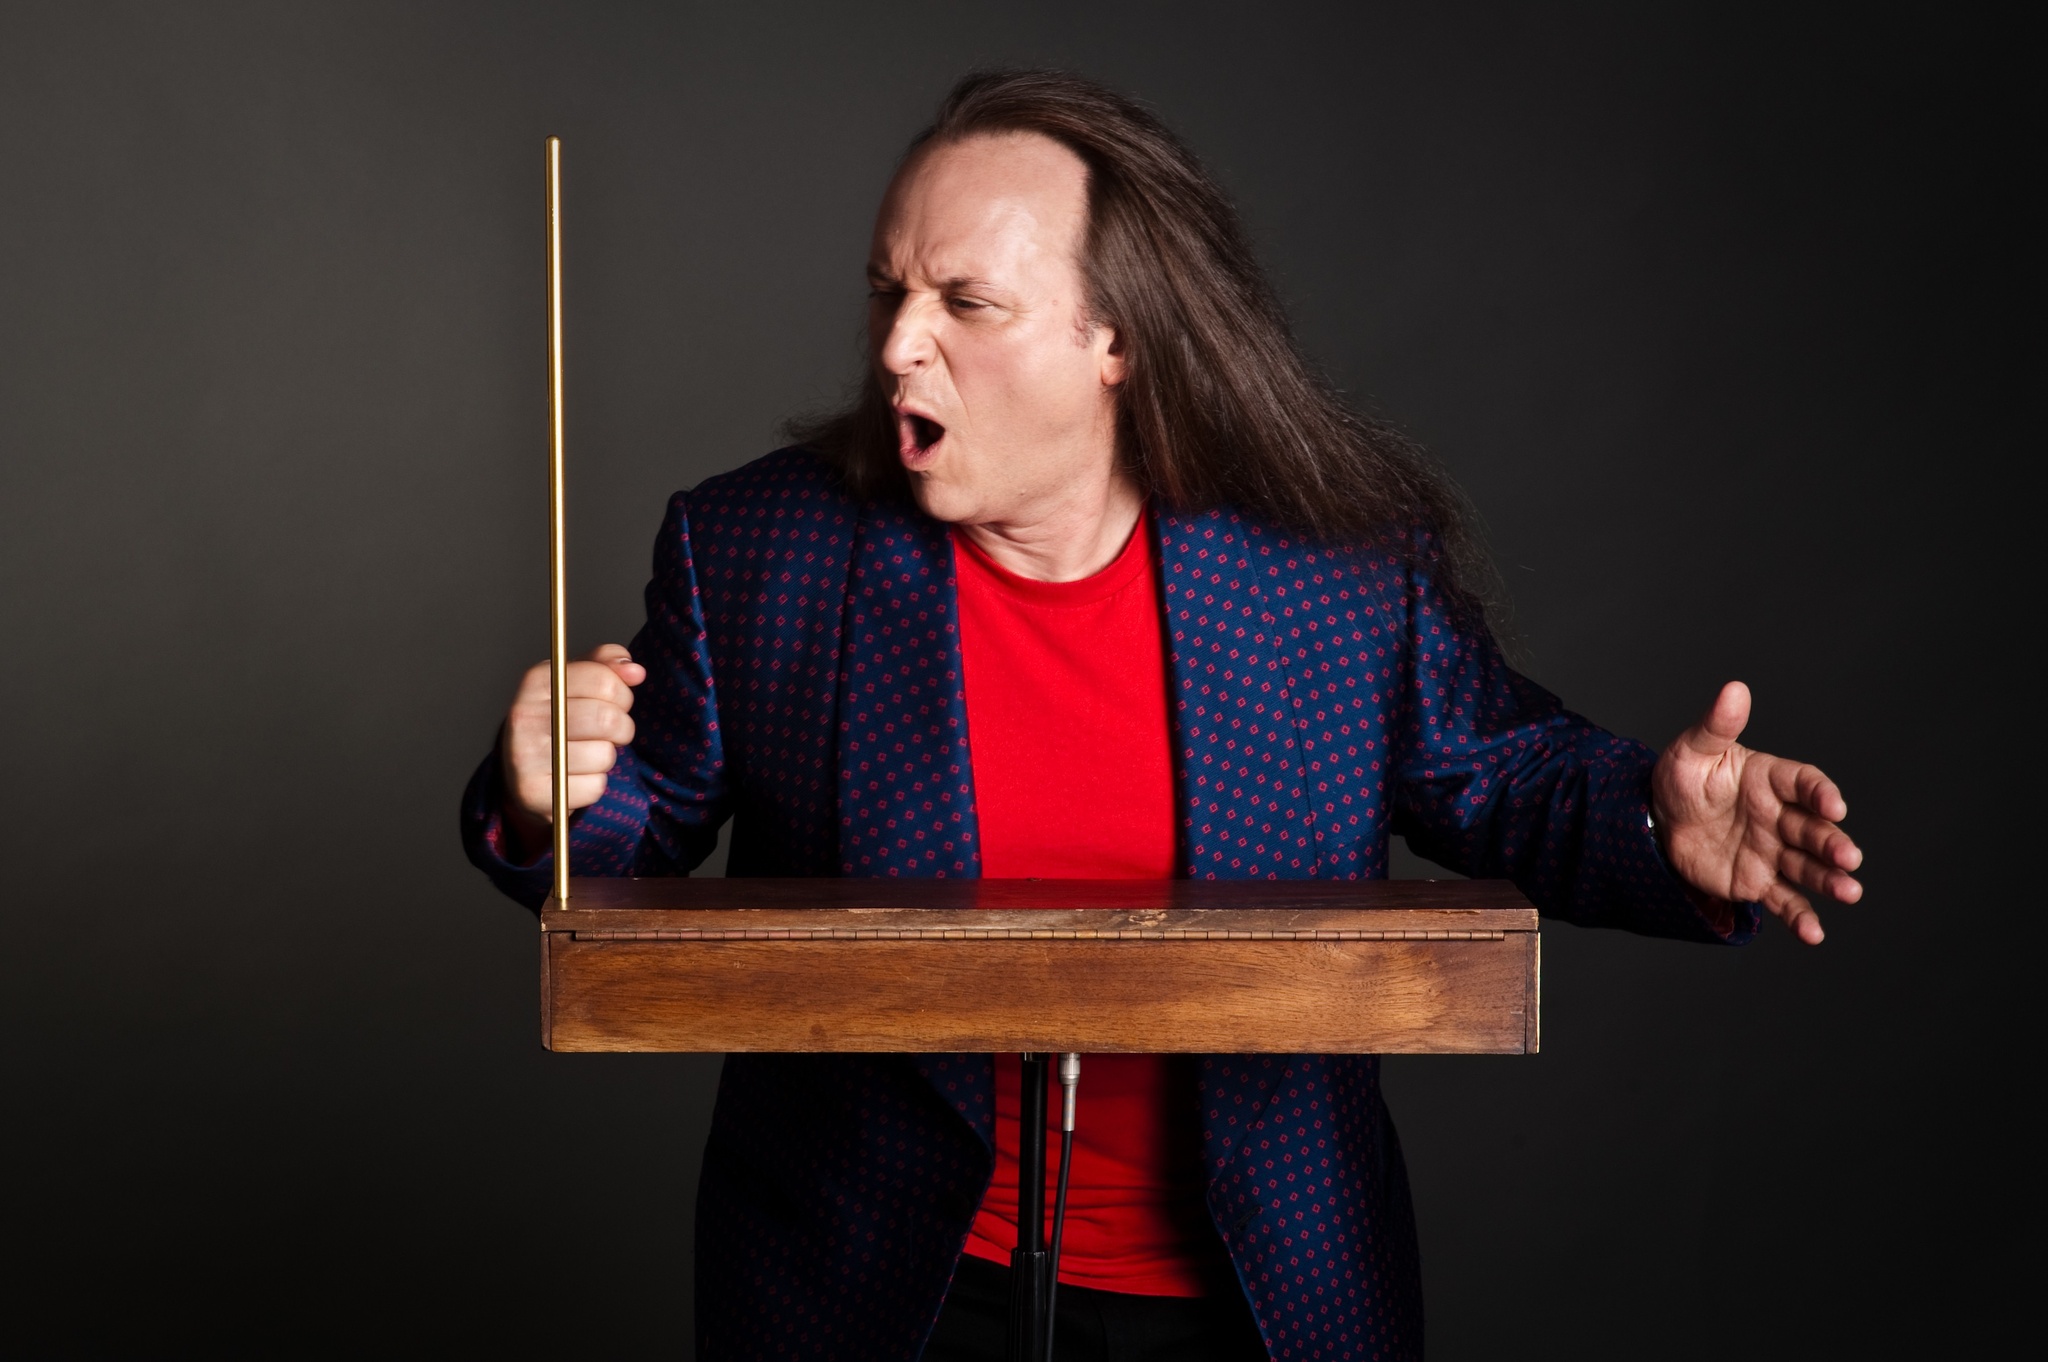 A white man wiith long brown hair stand with arms outstretched behind a theremin. He wears a purple blazer with a bright red tshirt beneath it.